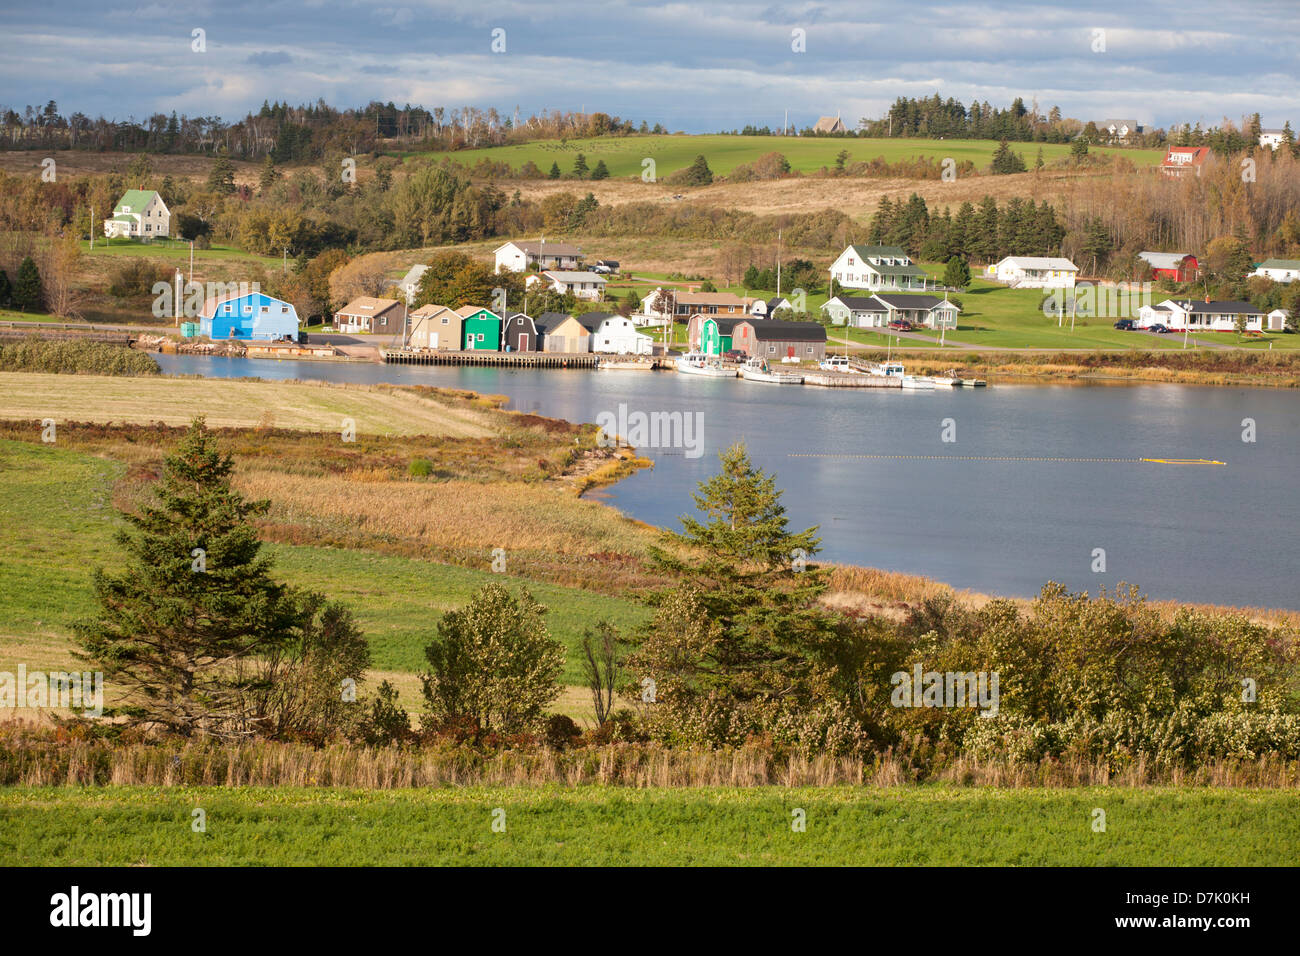 Rural landscape at French River, Prince Edward Island, Canada Stock Photo